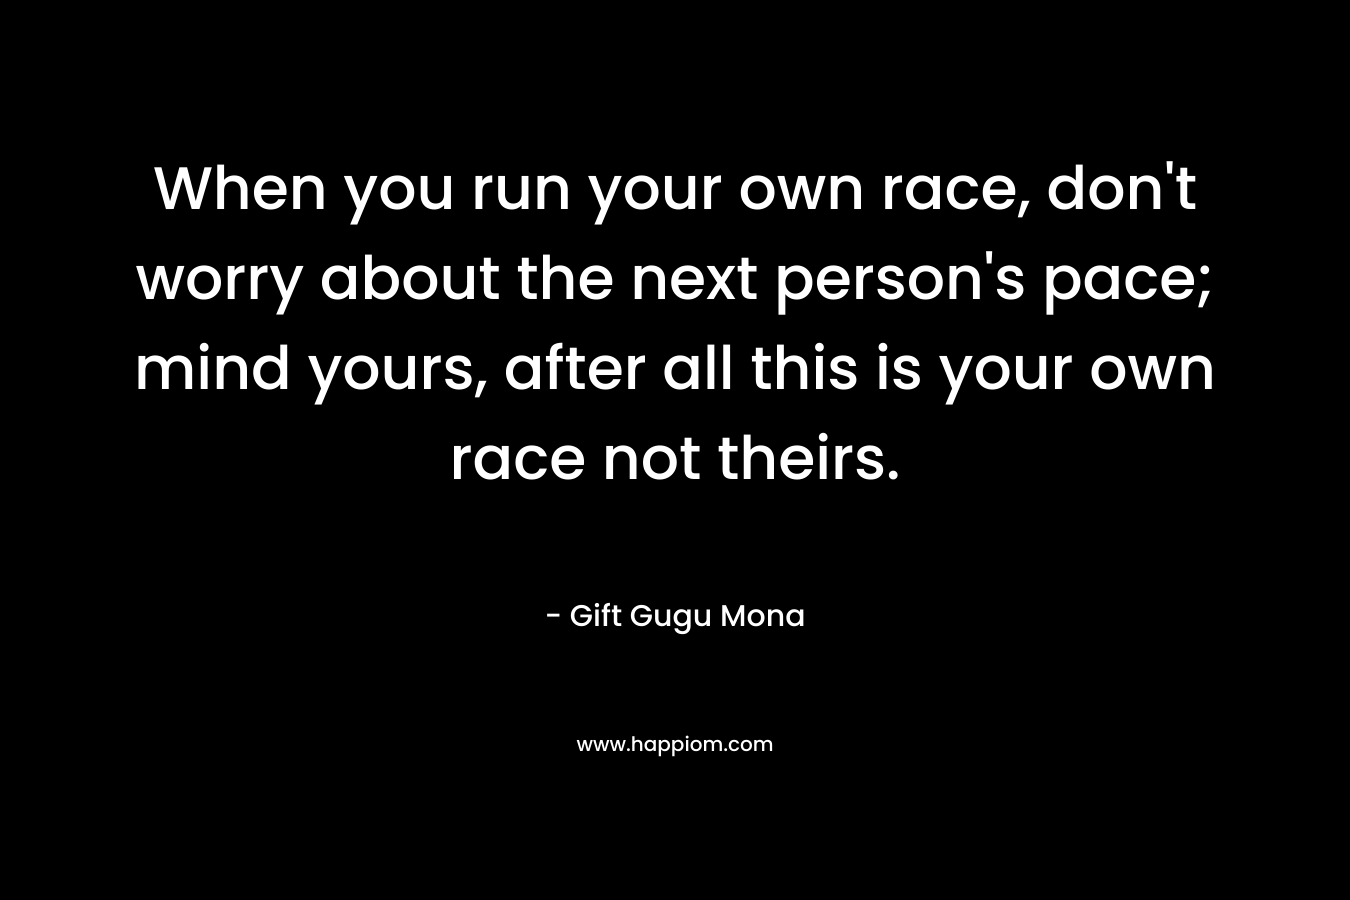 When you run your own race, don't worry about the next person's pace; mind yours, after all this is your own race not theirs.